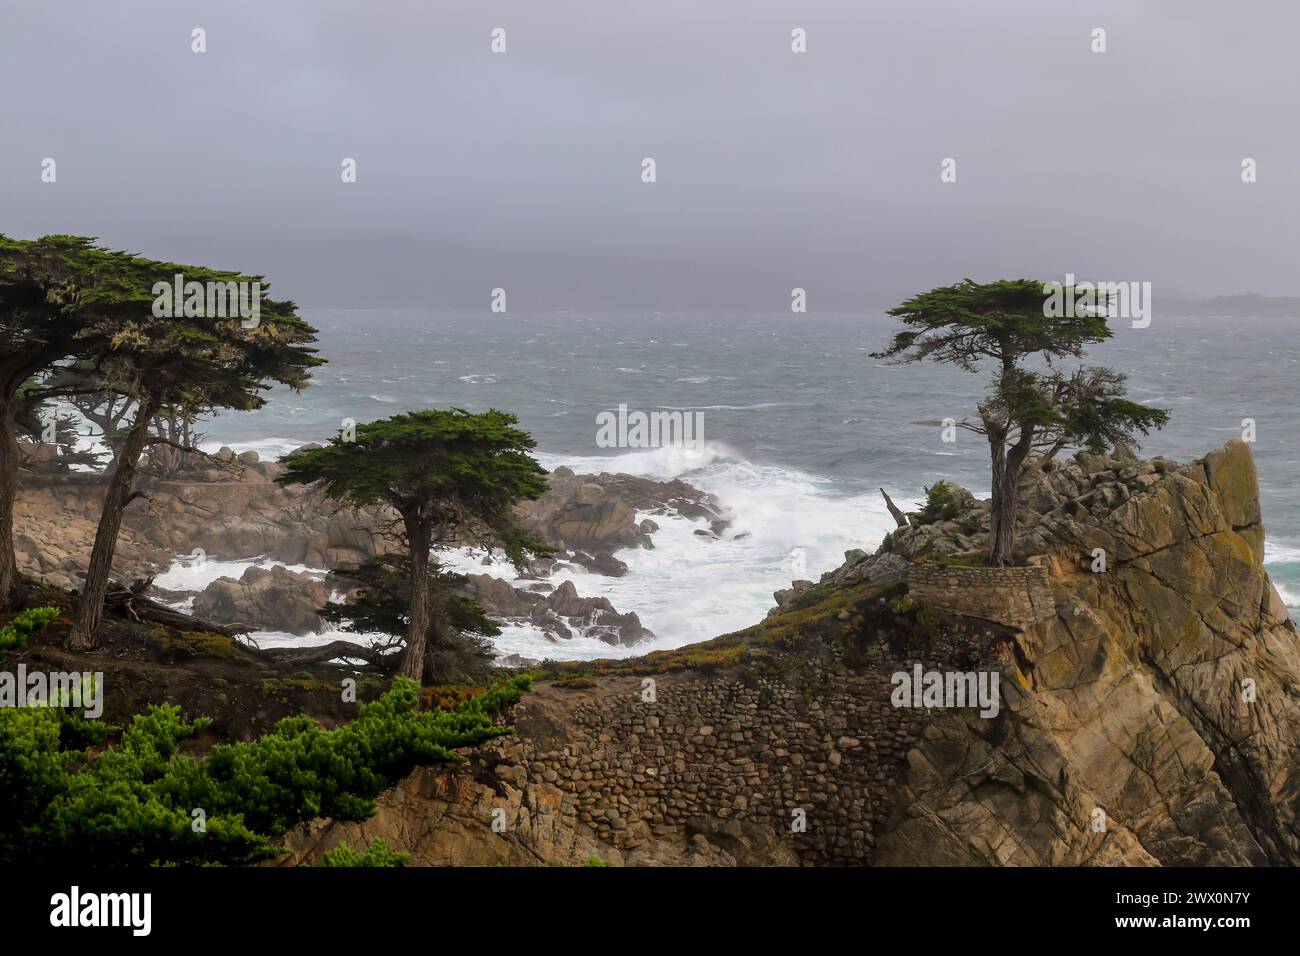 The Lone Cypress at 17-mile drive Pebble beach, California on a rainy day. Stock Photo